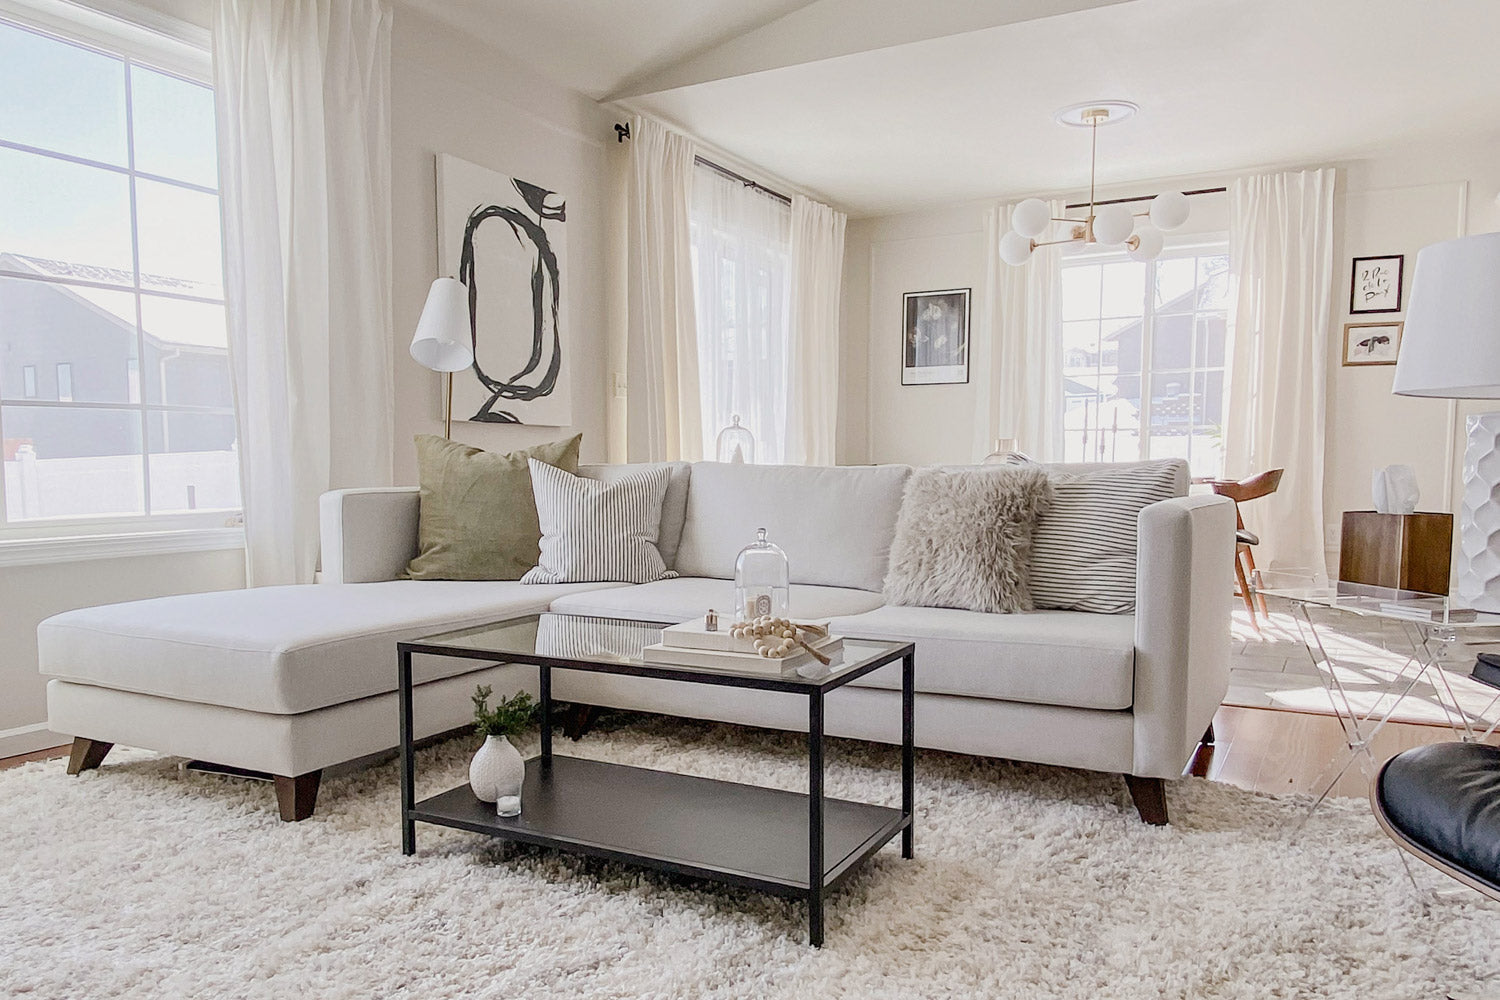 5 Tips to Find The Most Comfortable Couch (Or Sectional!)